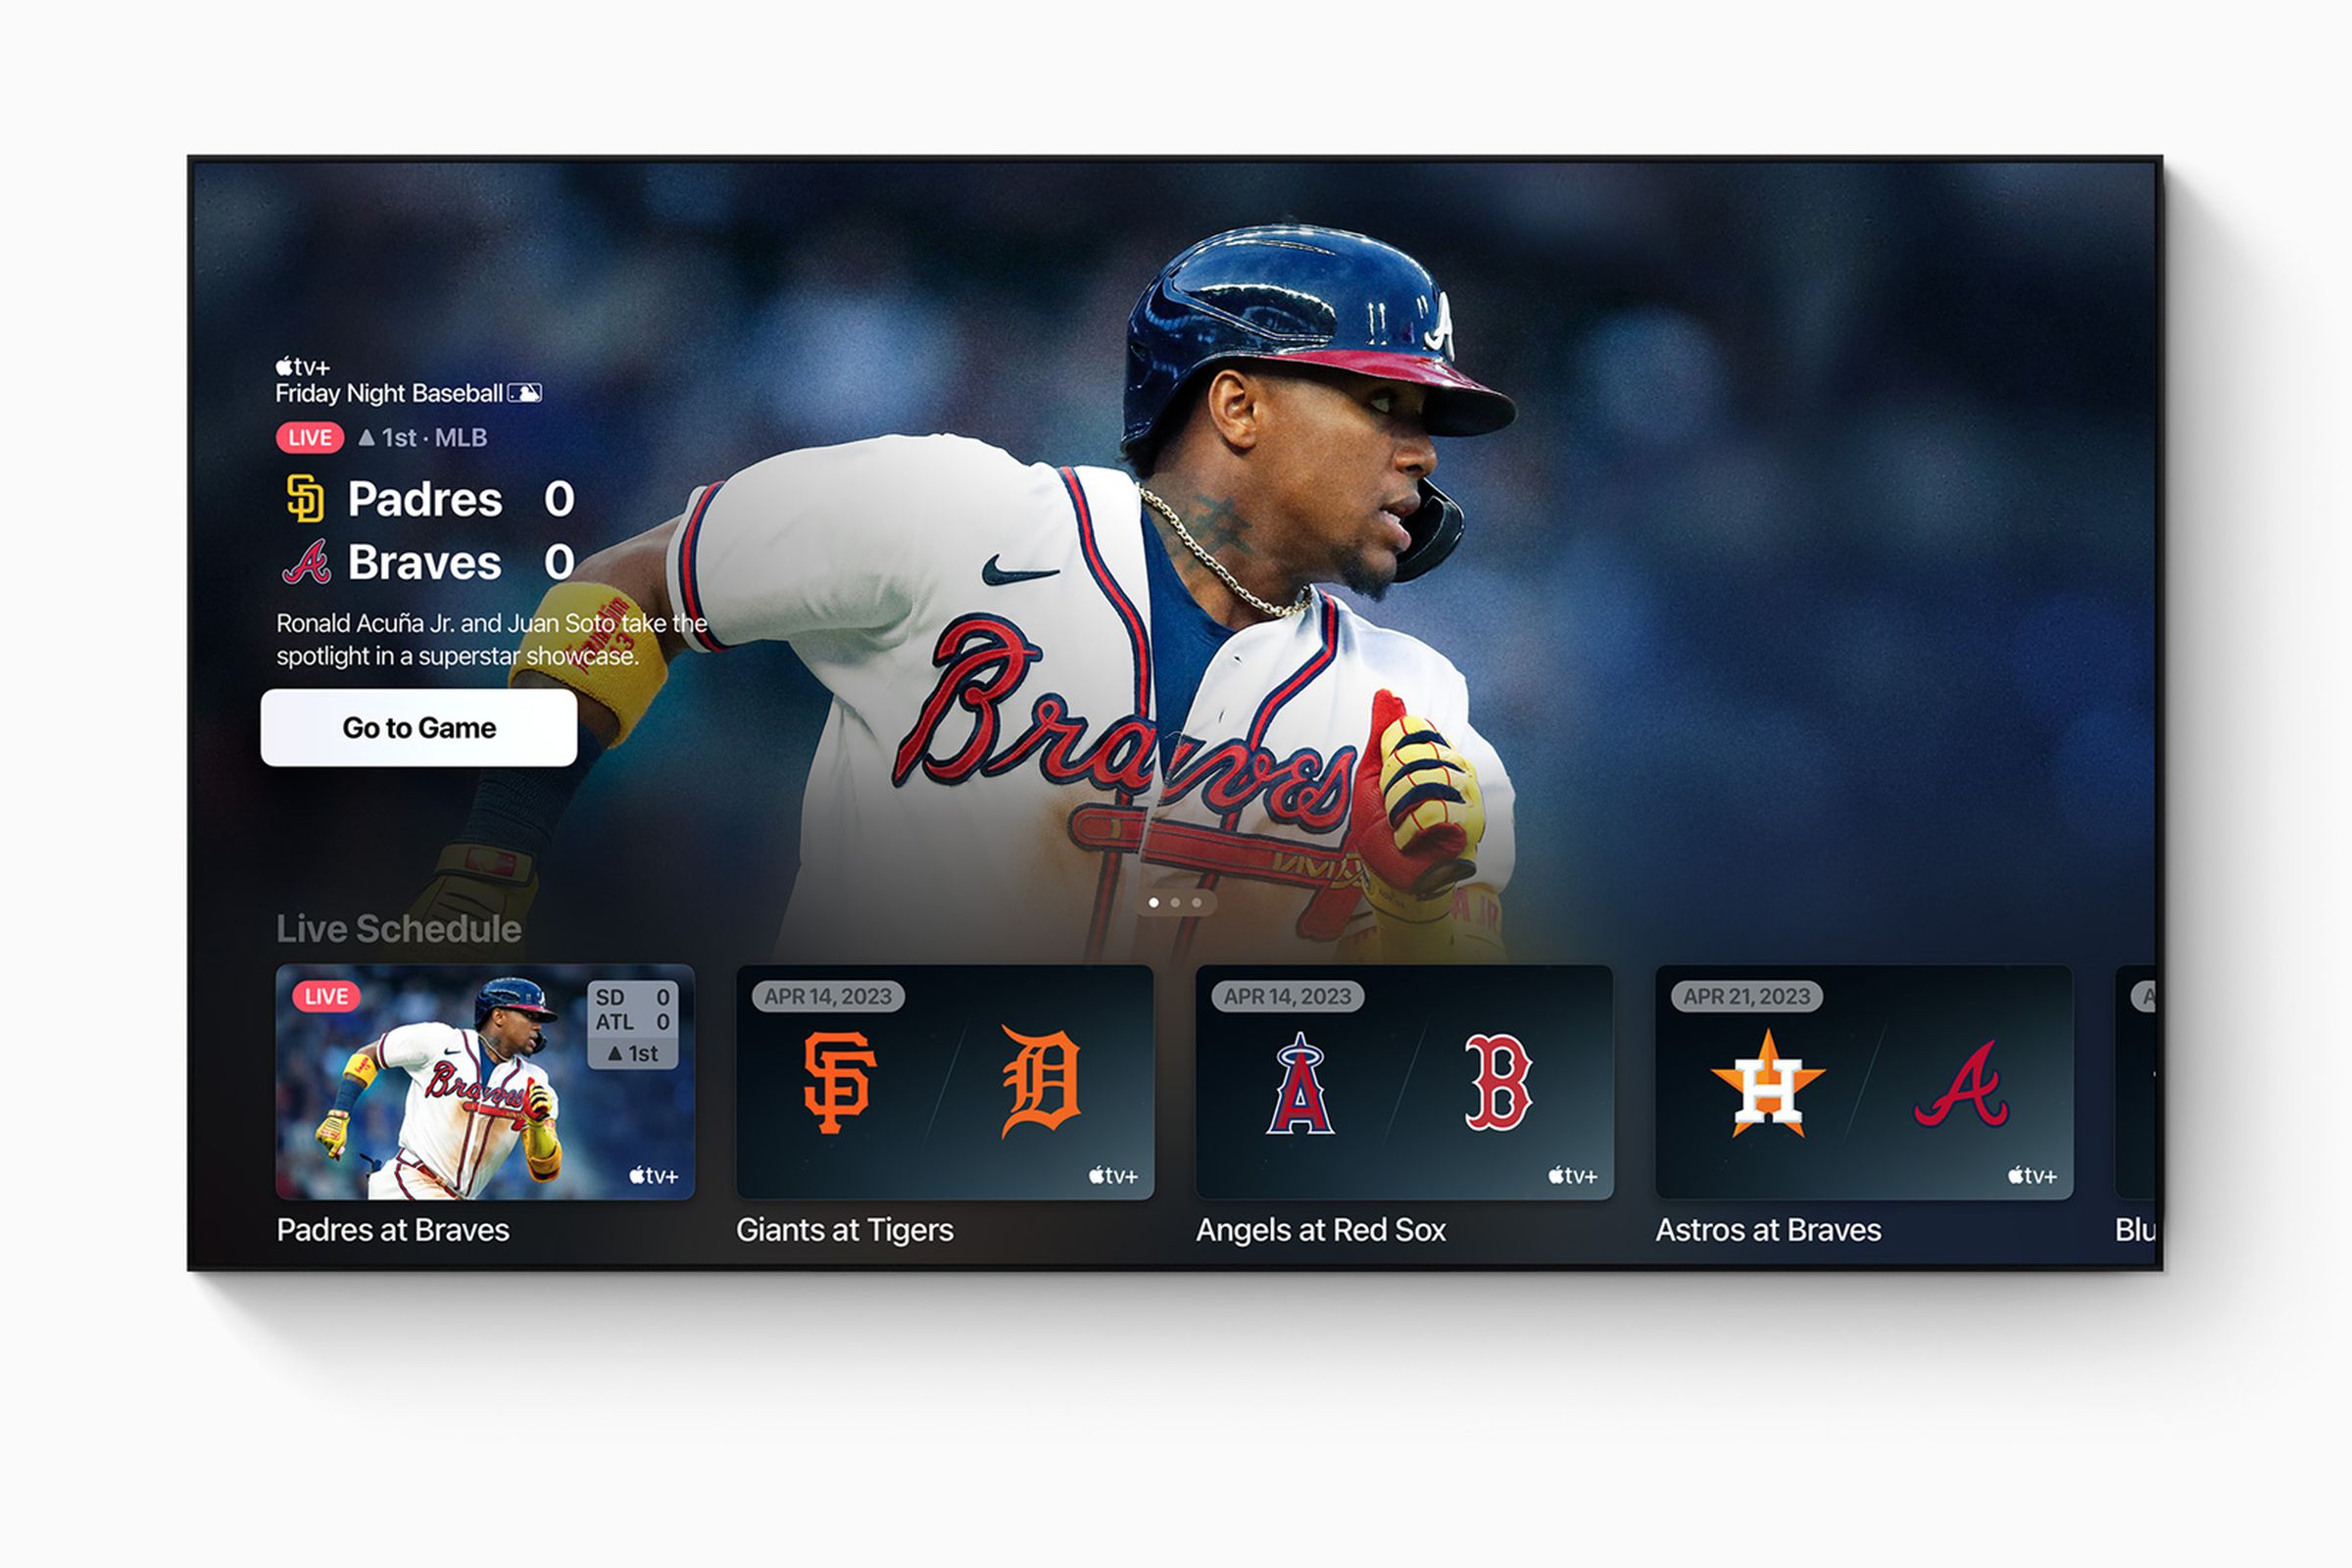 An image showing the Apple TV Plus interface with a Friday Night Baseball game playing